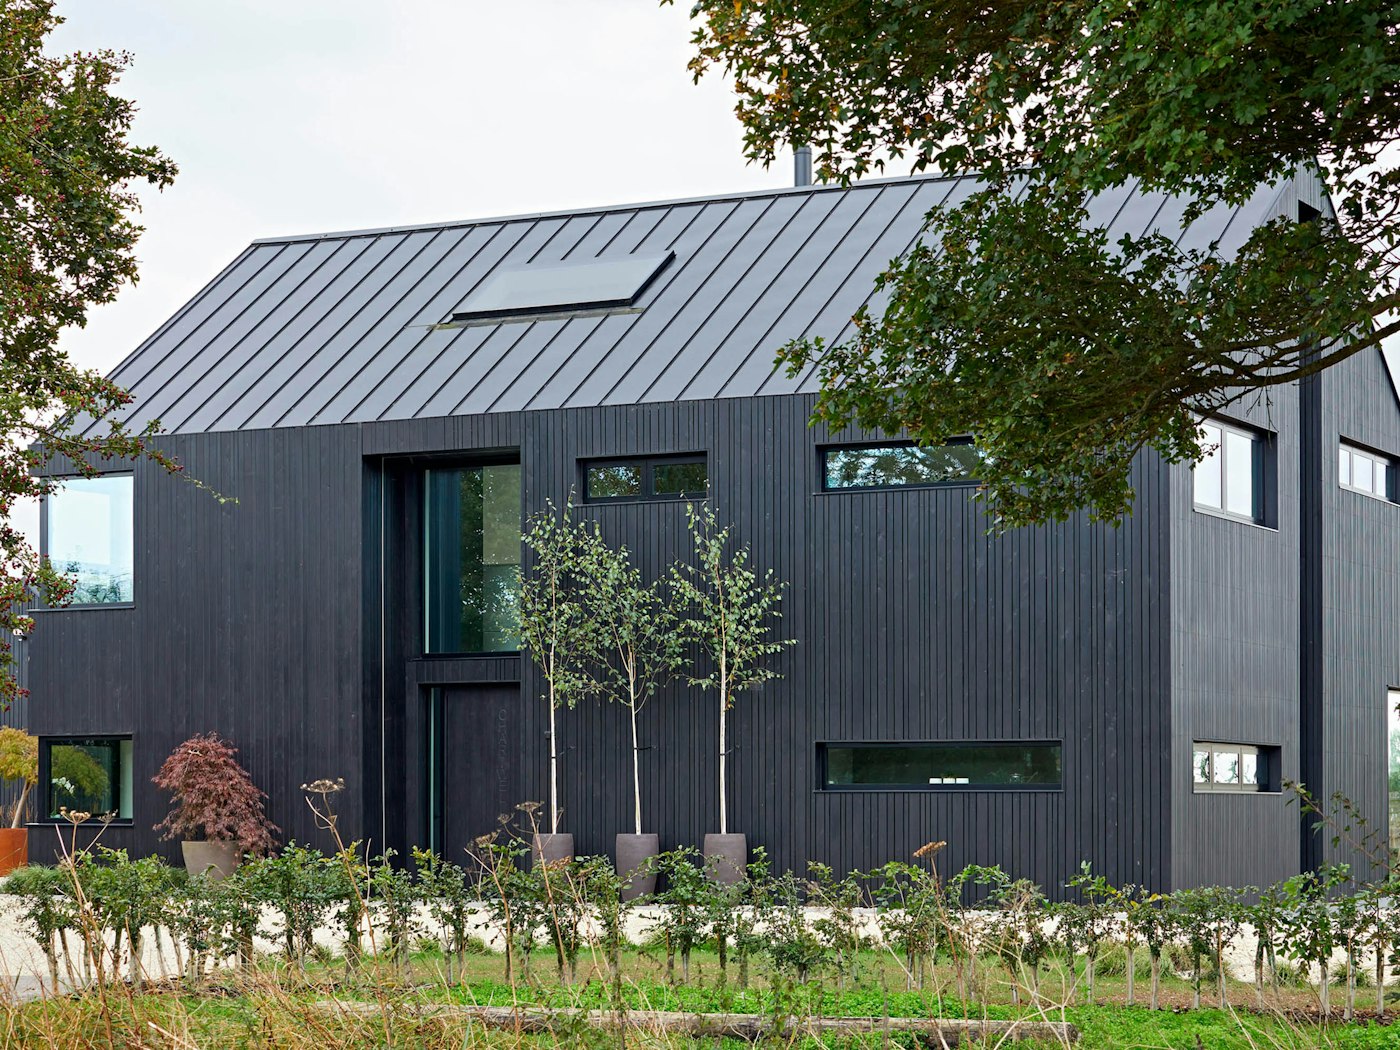 This modern, barn self-build has a sleek exterior aesthetic with the front door fitting in neatly with the black cladding